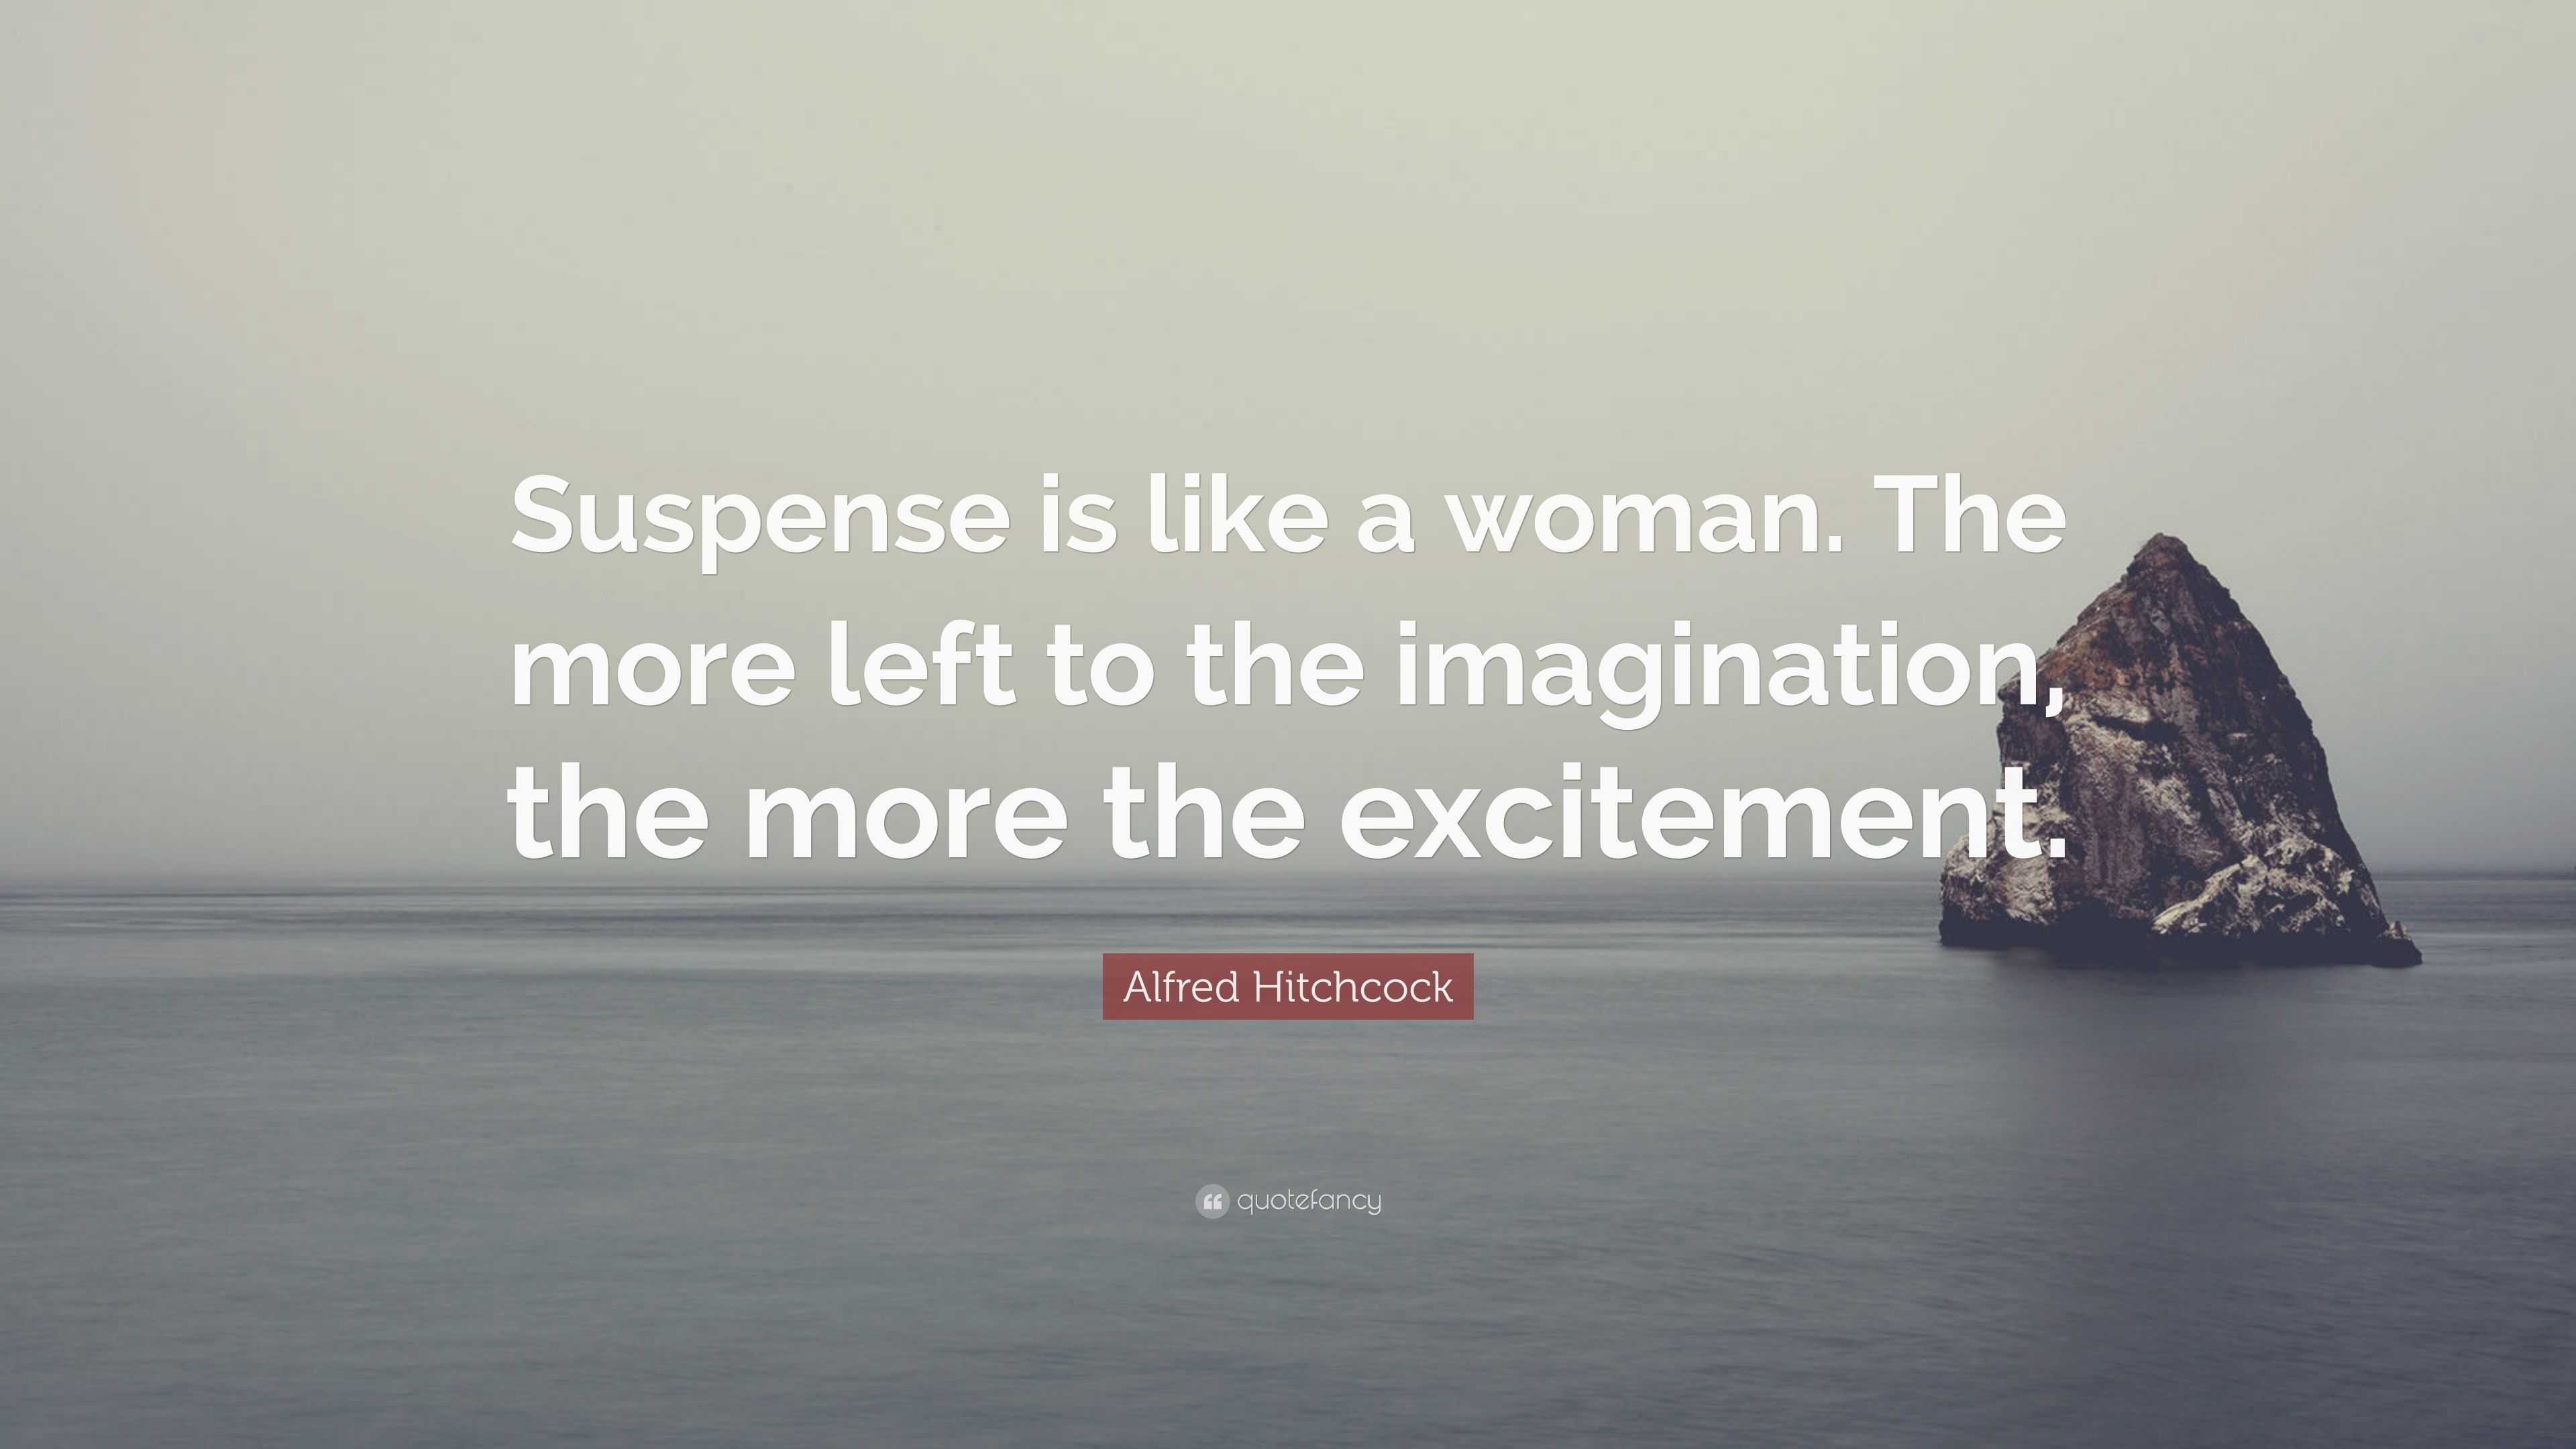 Alfred Hitchcock Quote: “Suspense is like a woman. The more left to the ...